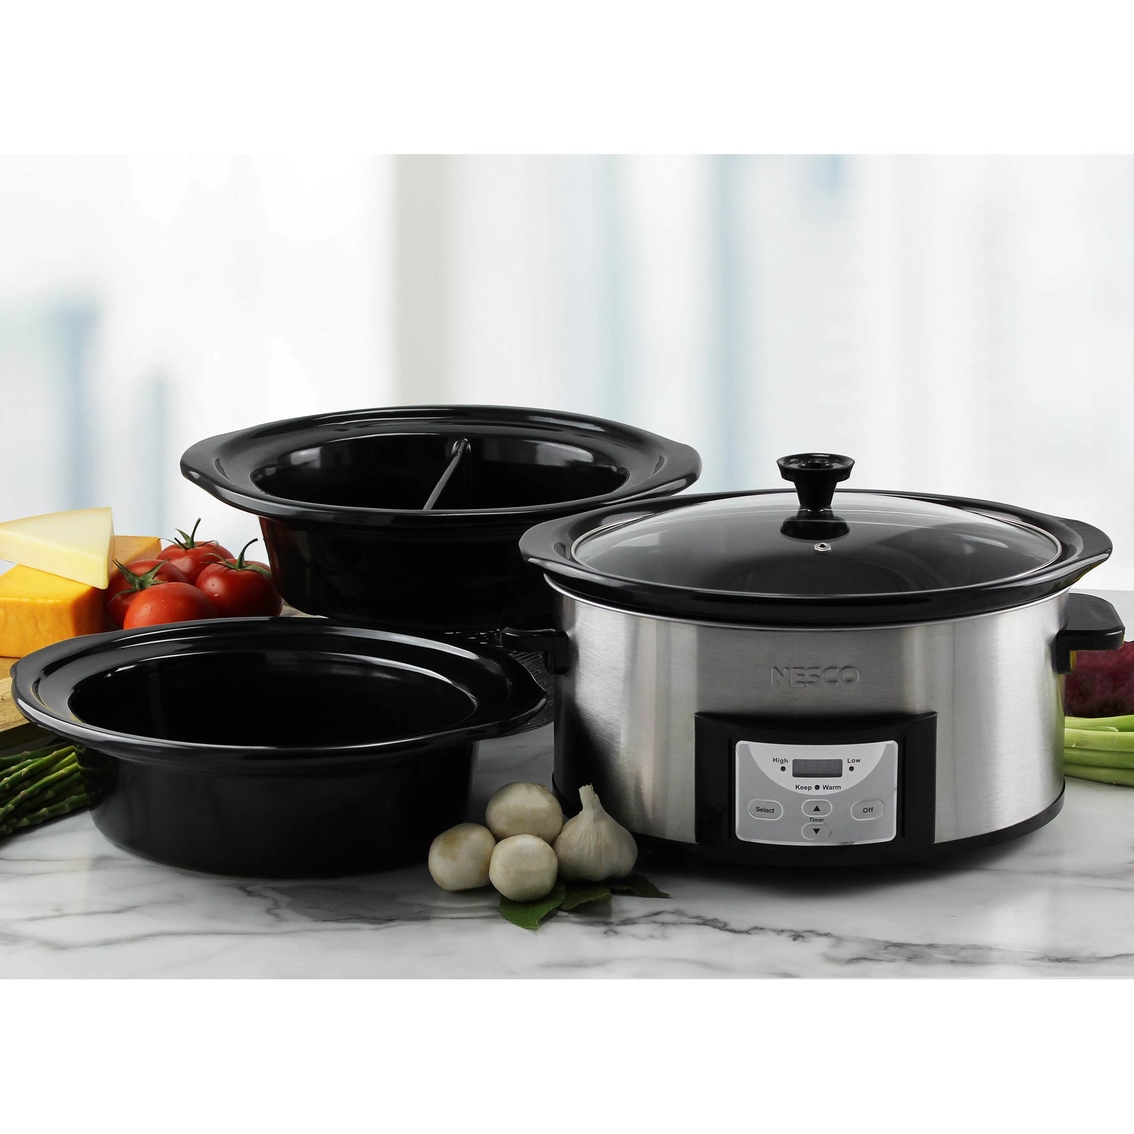 Add Color To Your Table With NESCO's Slow Cookers!